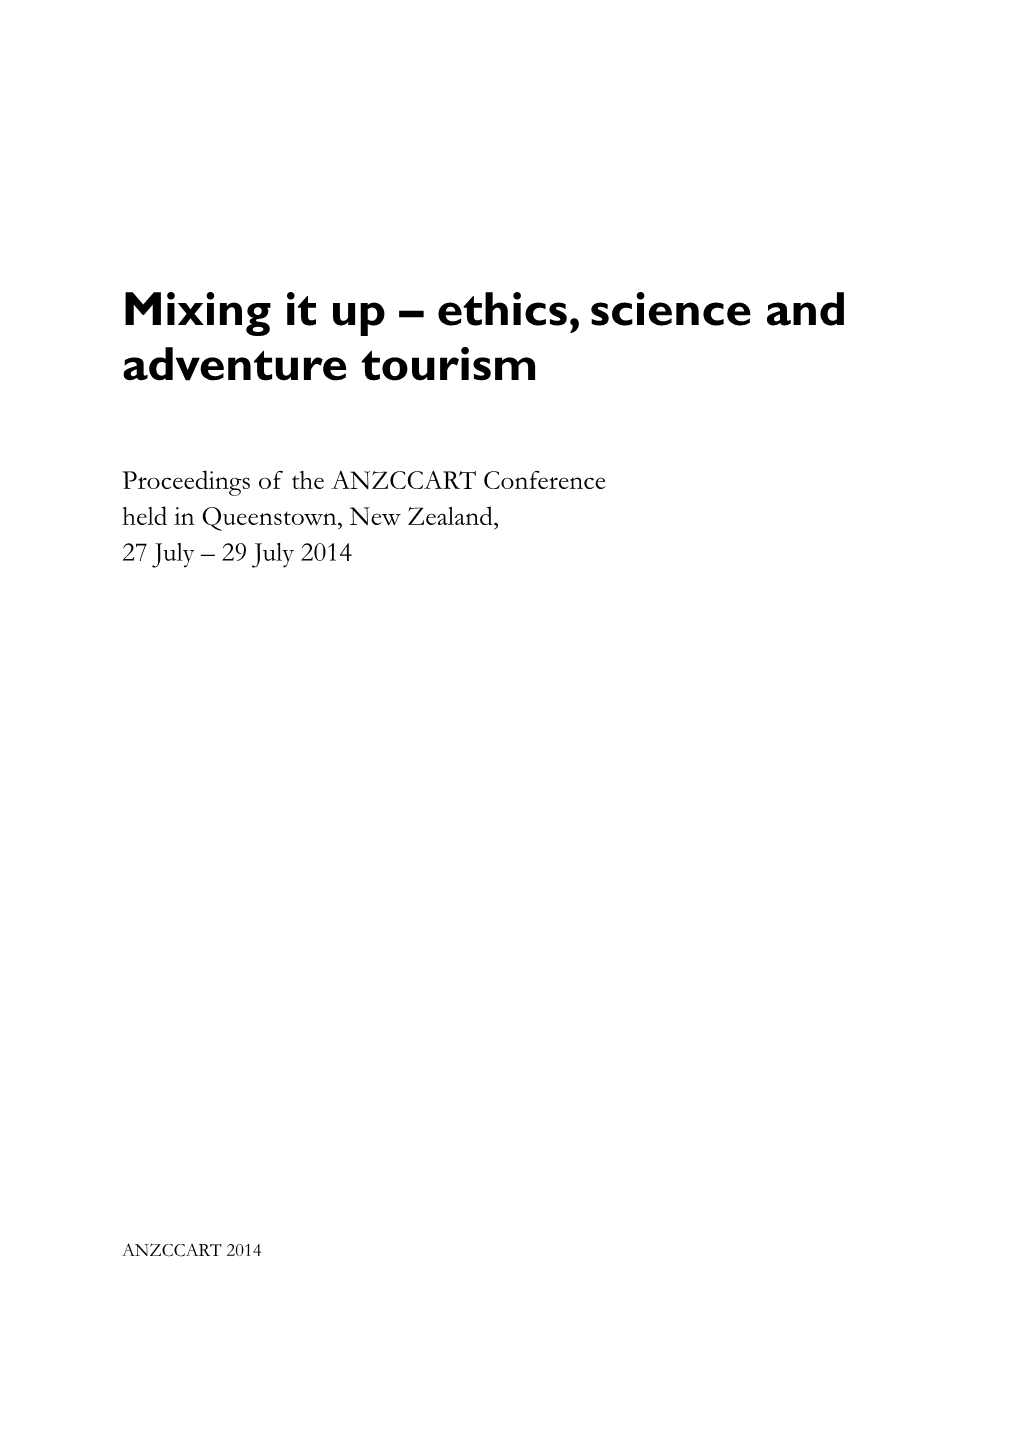 Ethics, Science and Adventure Tourism